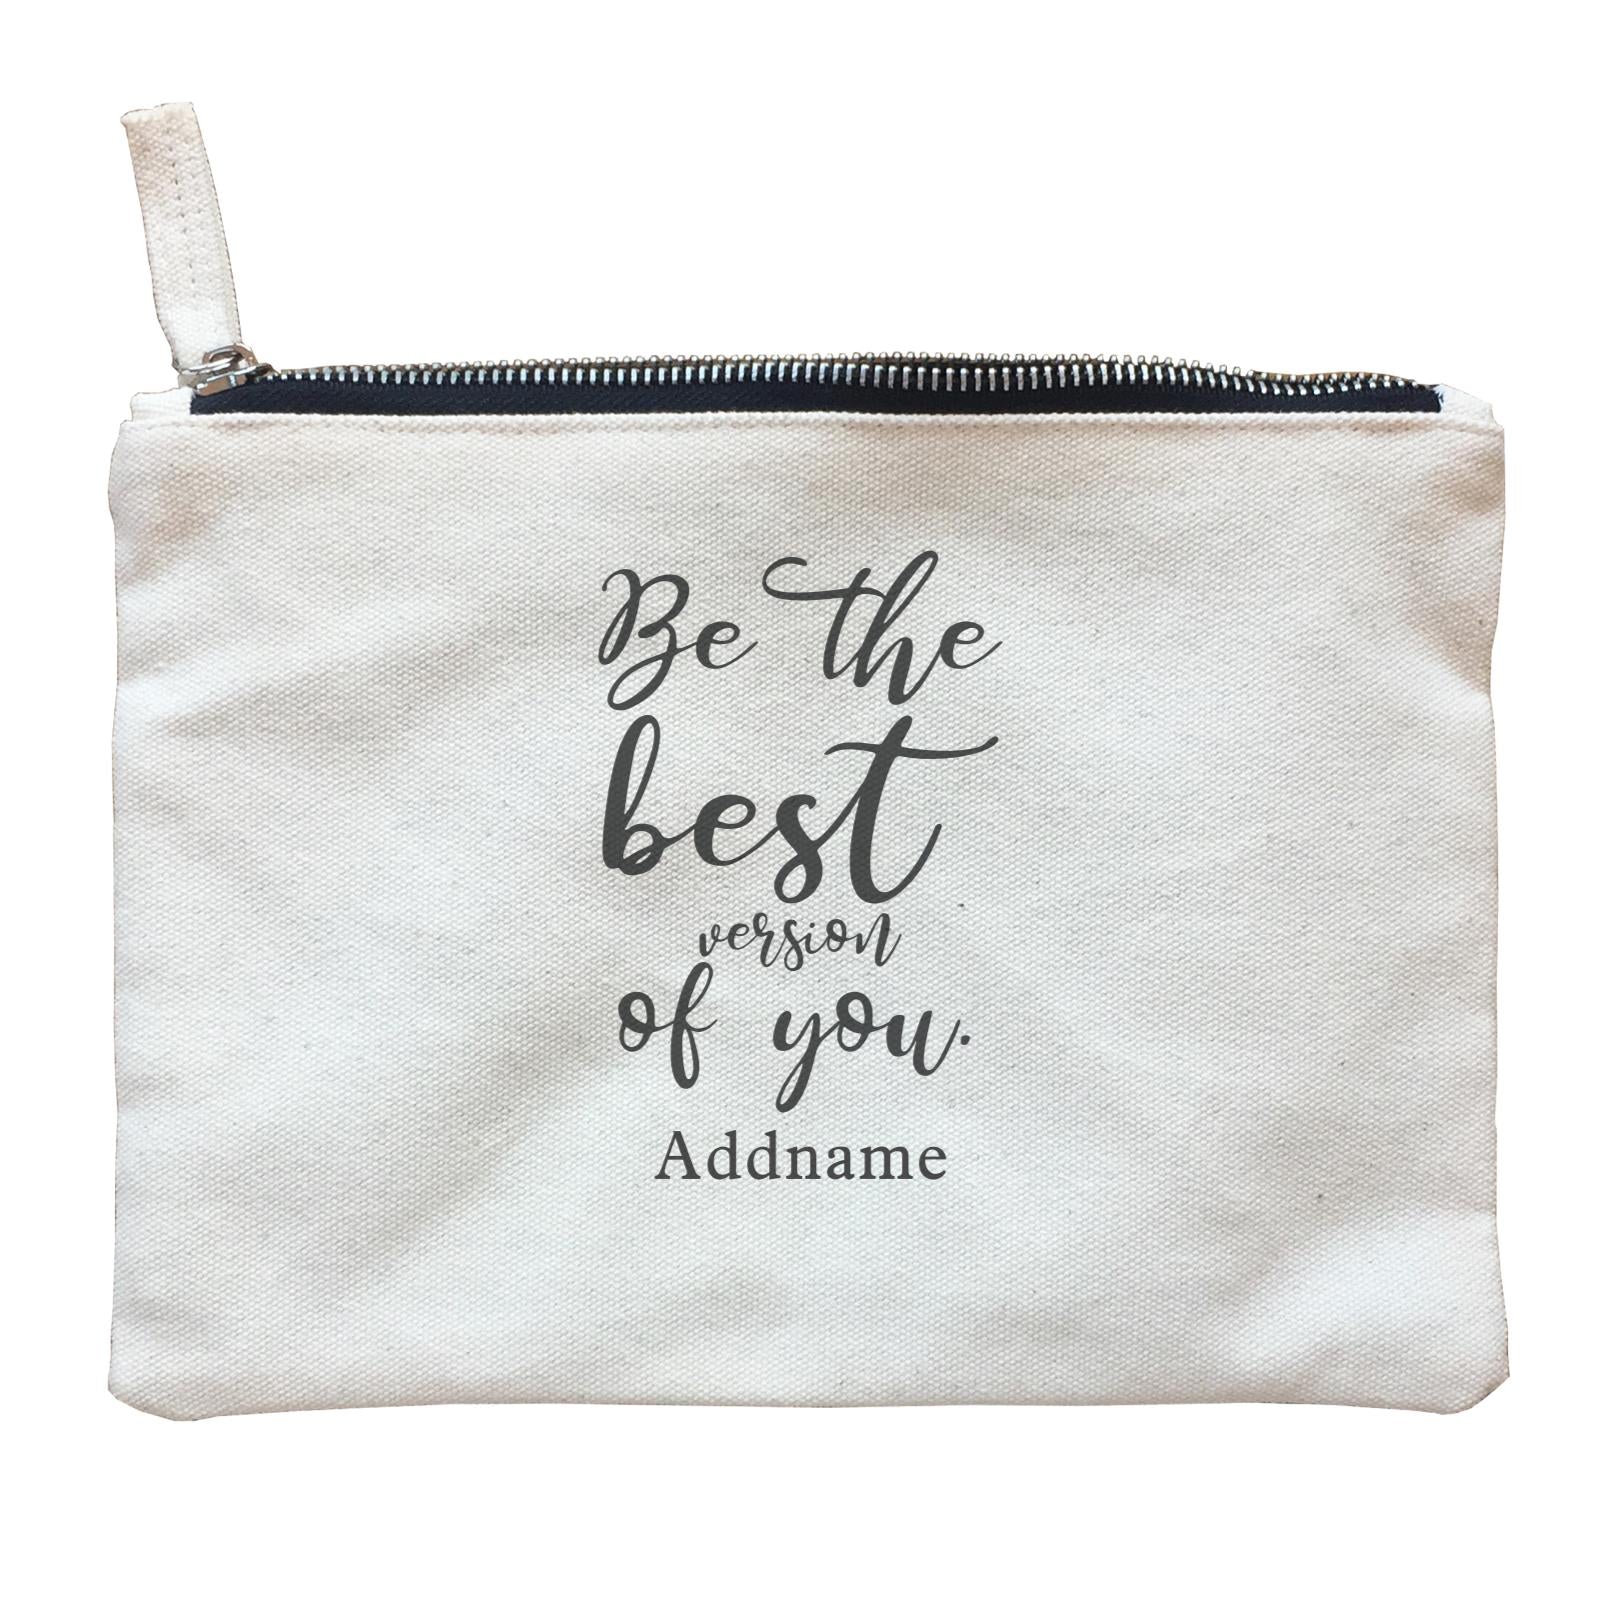 Inspiration Quotes Be The Best Version Of You Addname Zipper Pouch